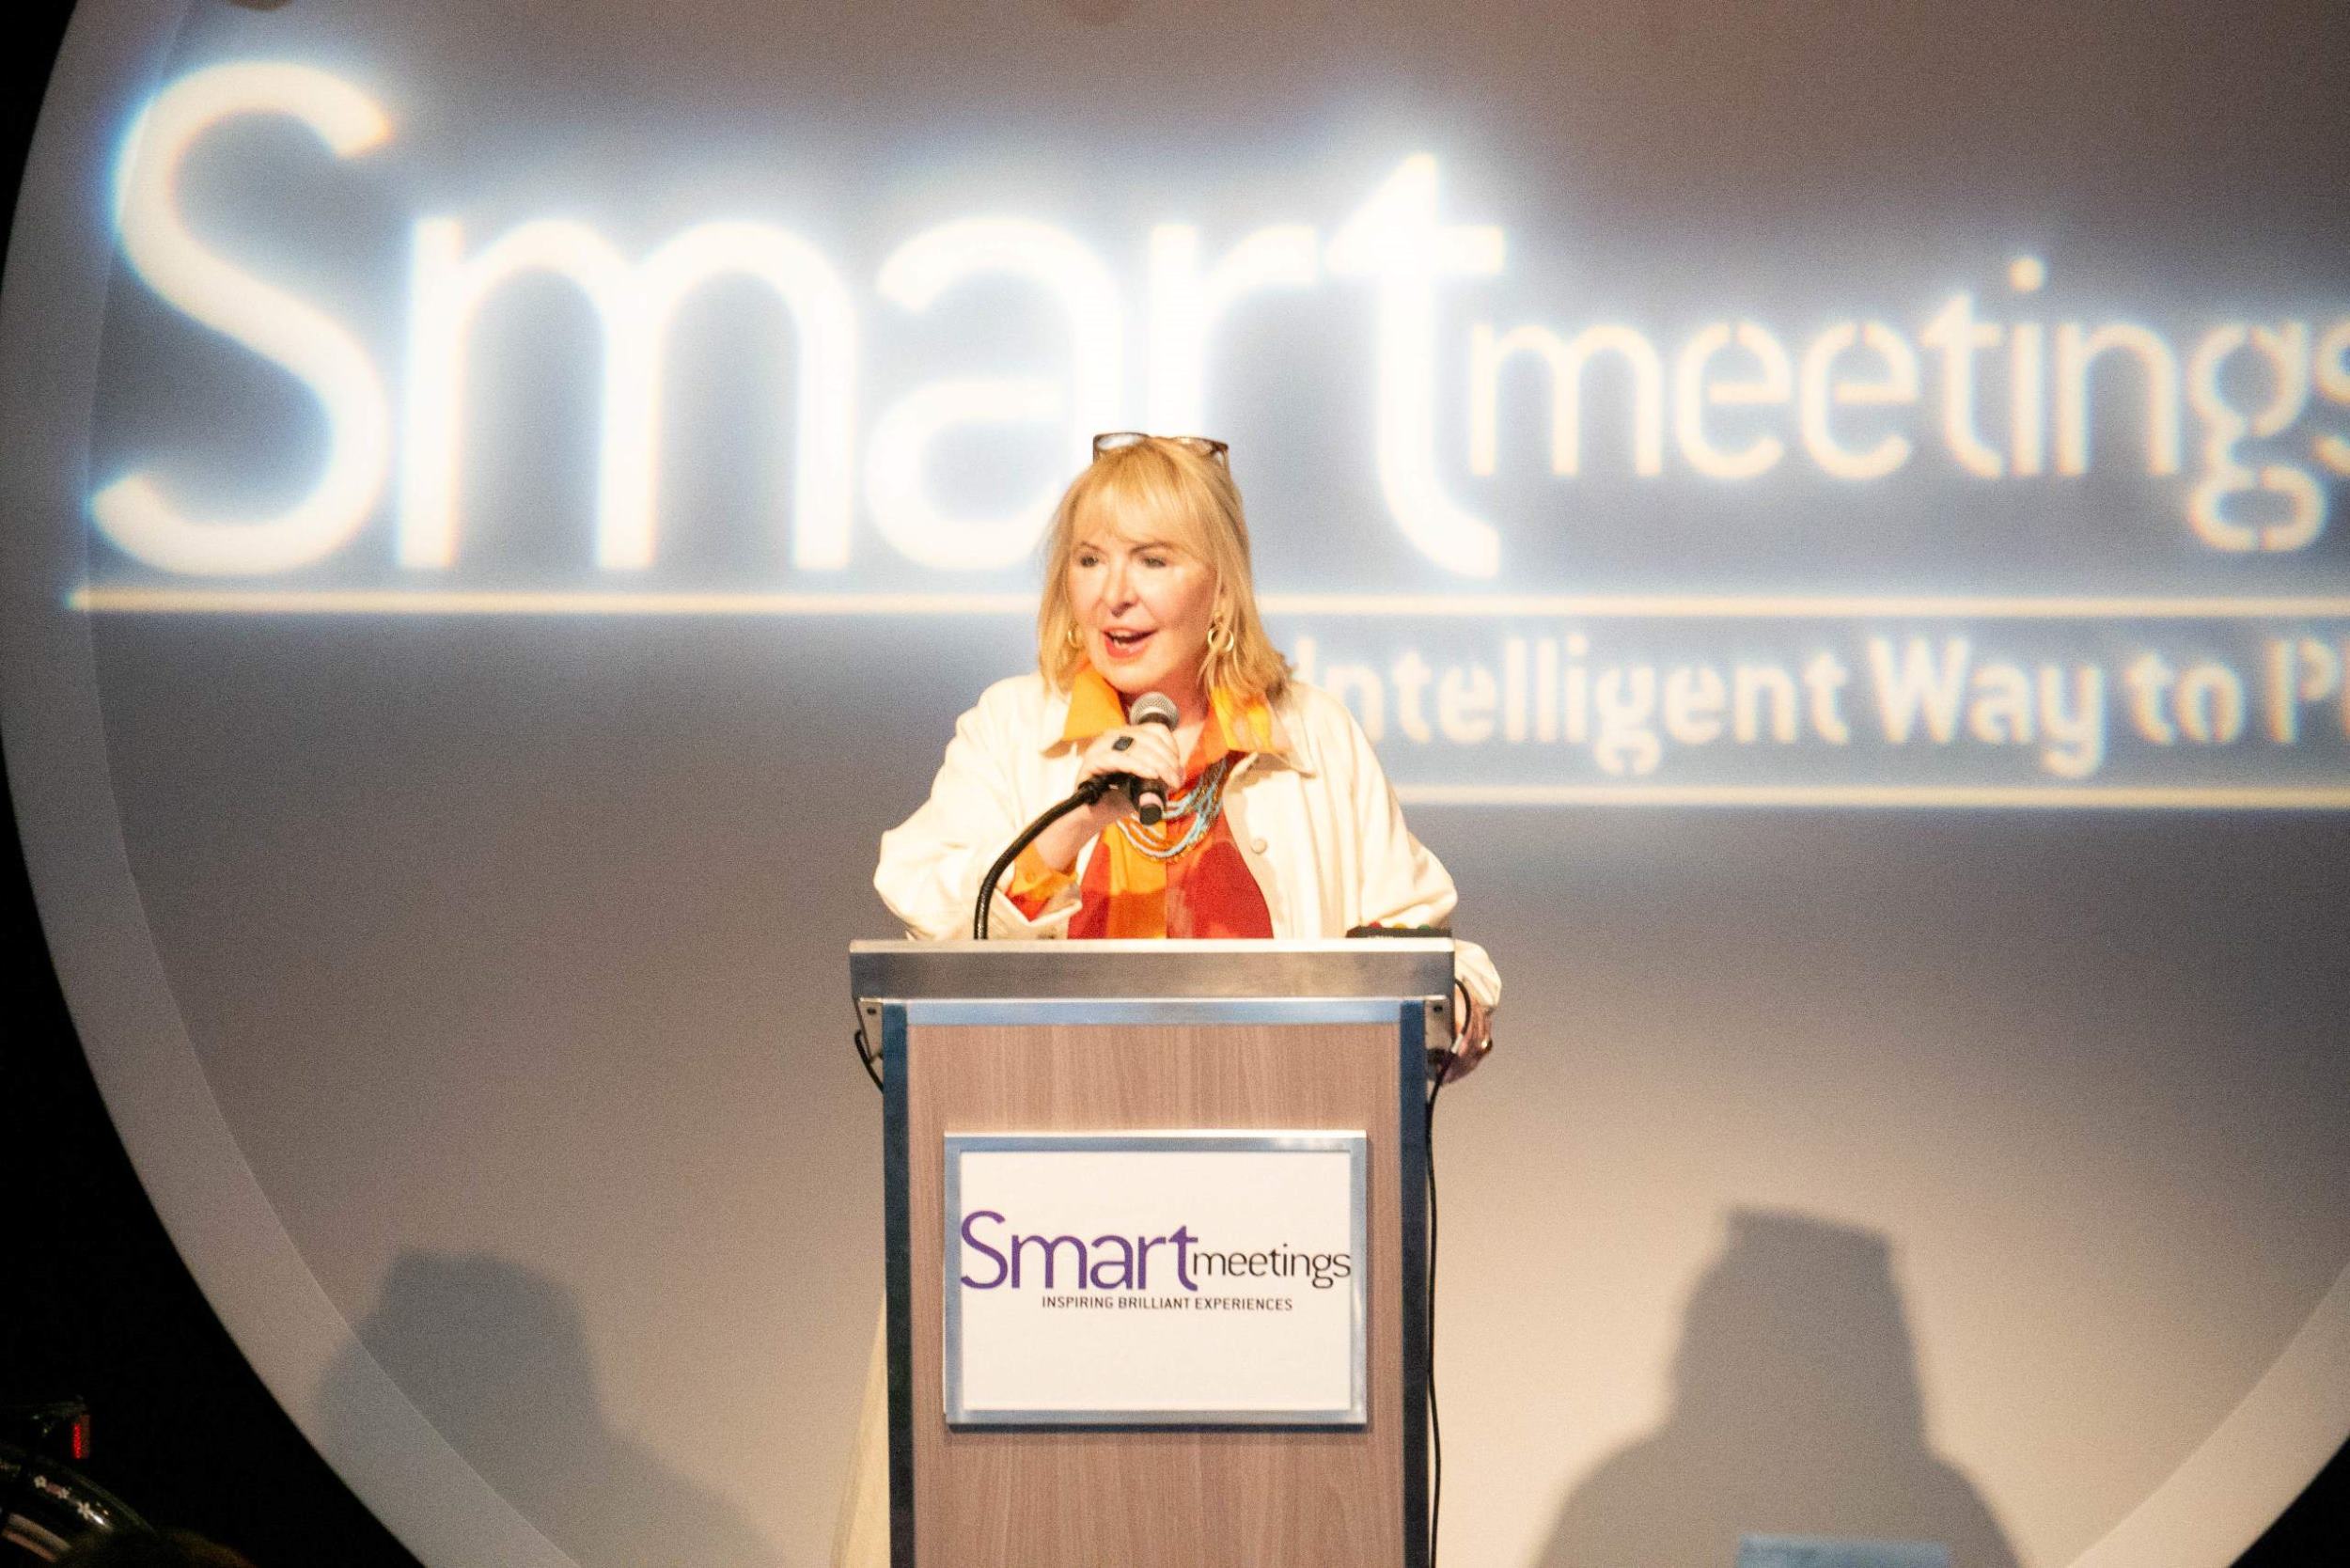 woman, marin bright, standing behind podium on stage in front of white neon "smart meetings" sign